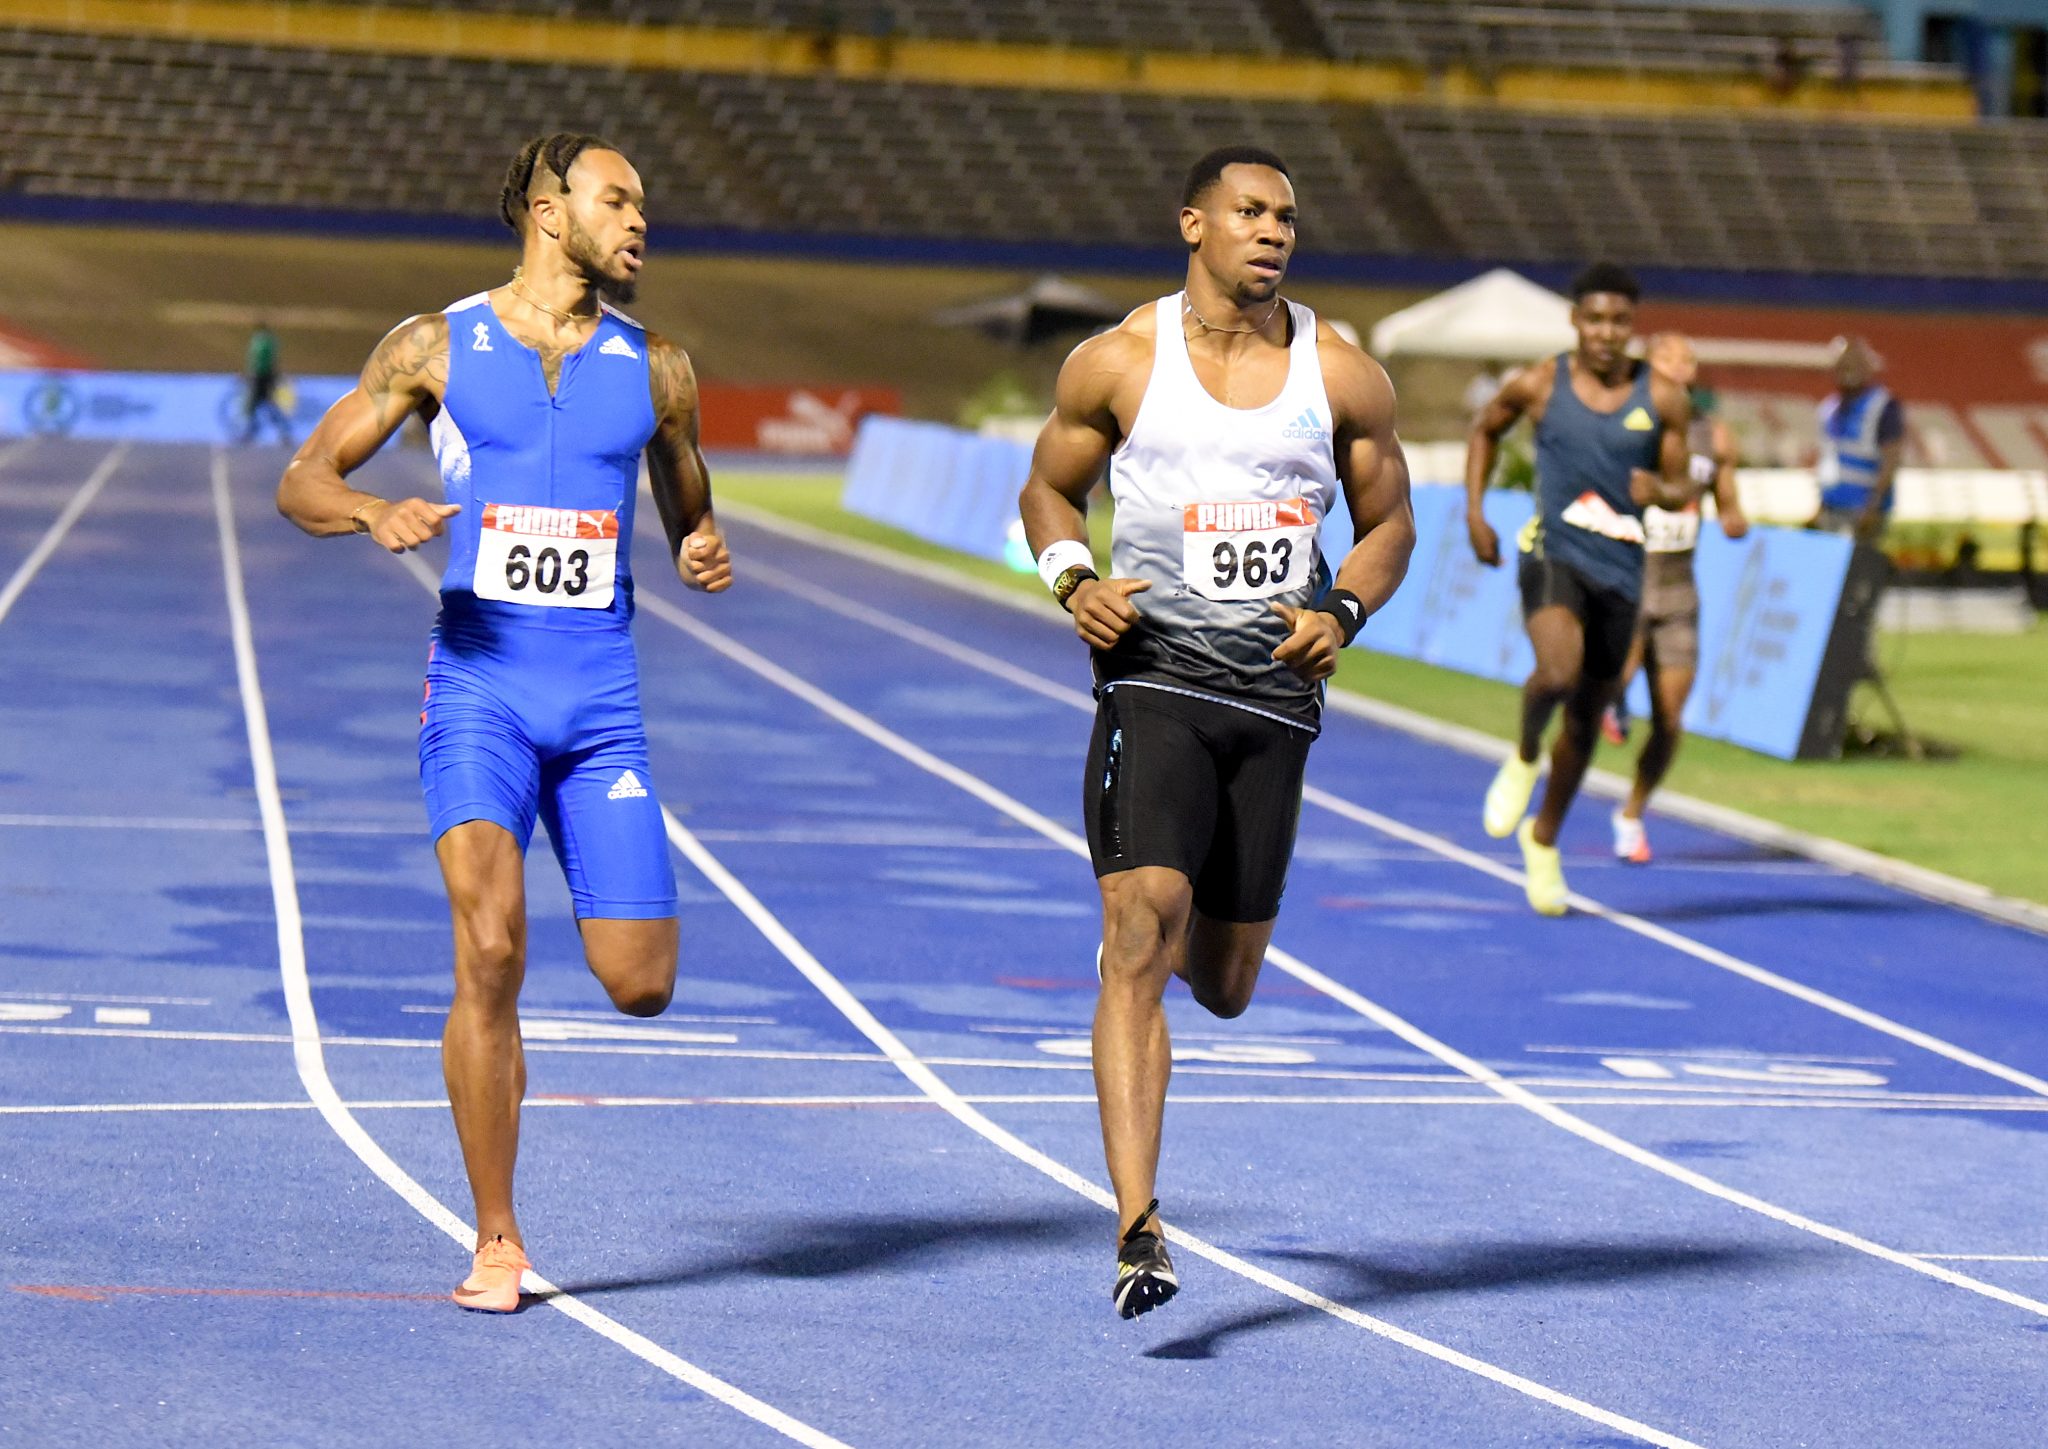 FraserPryce, Blake to lead 200M at Jamaica Trials North American and